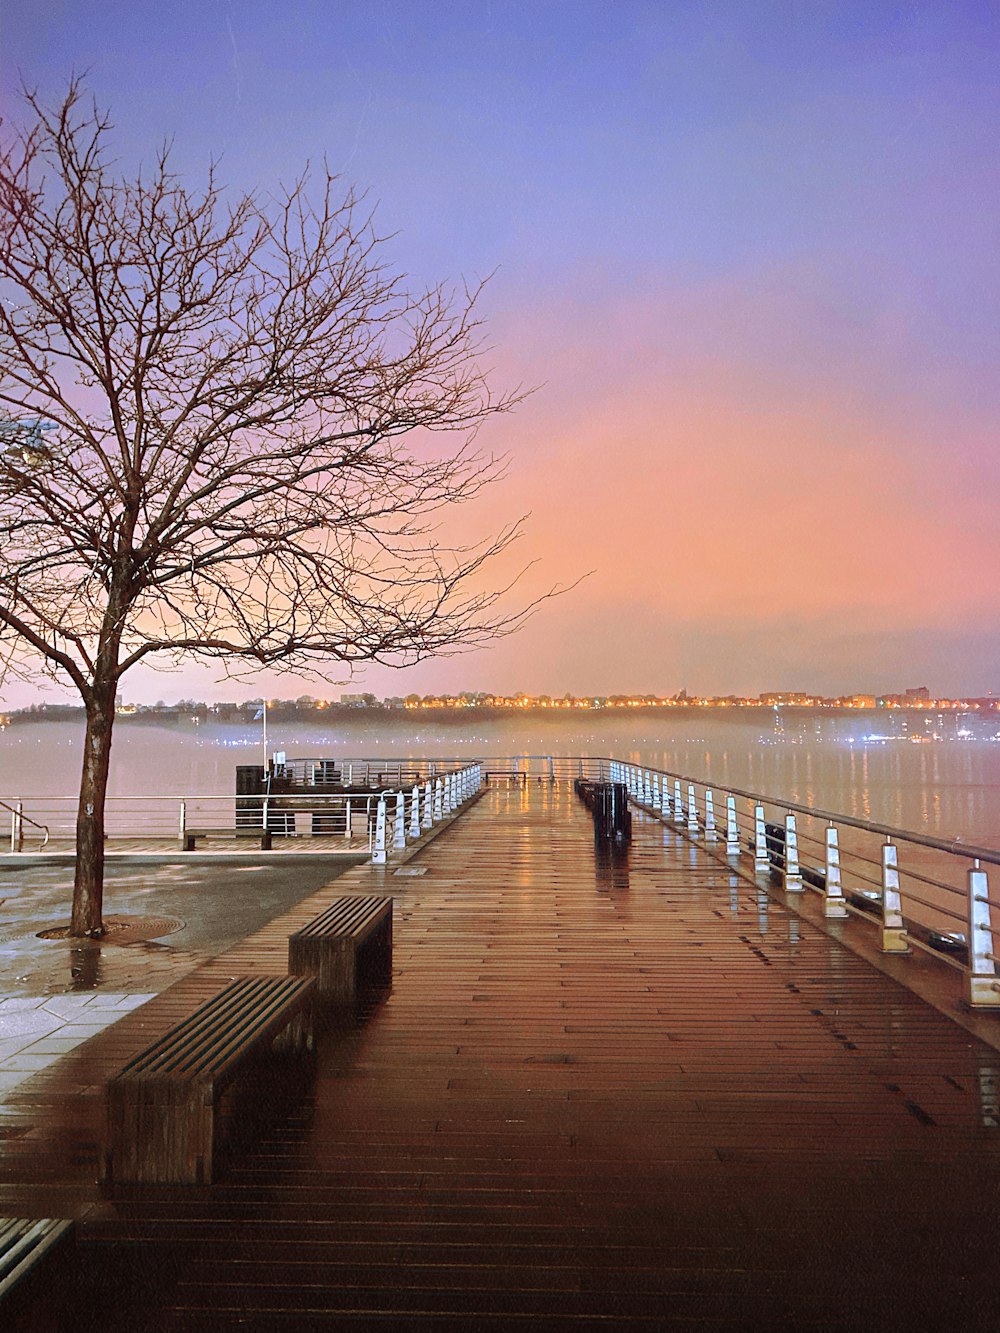 bare tree beside benches near body of water during daytime